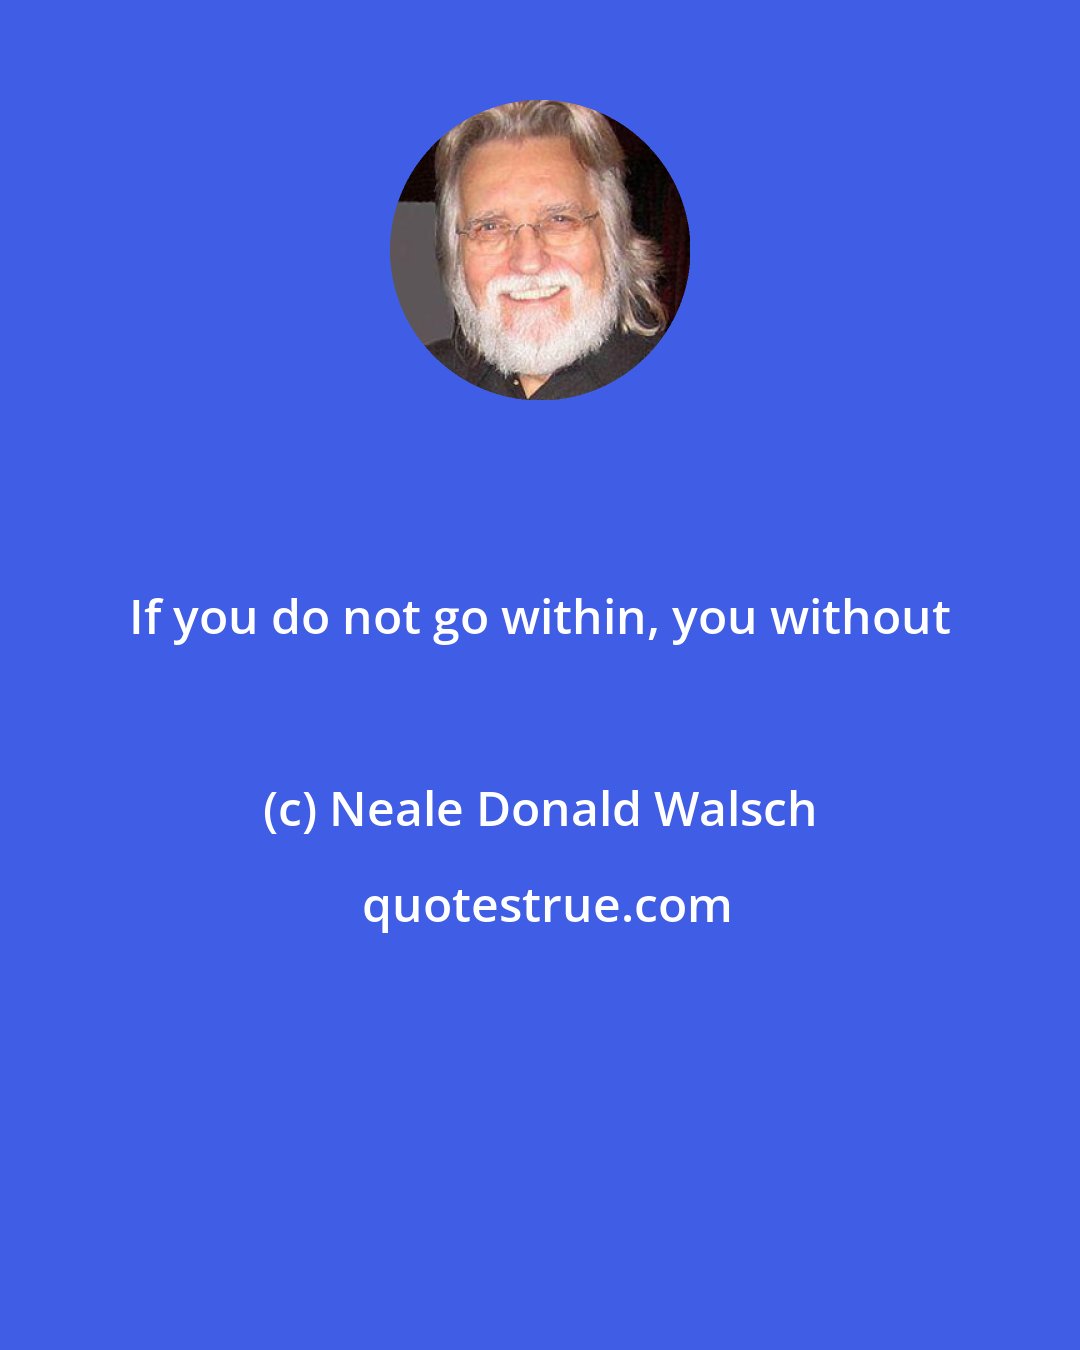 Neale Donald Walsch: If you do not go within, you without